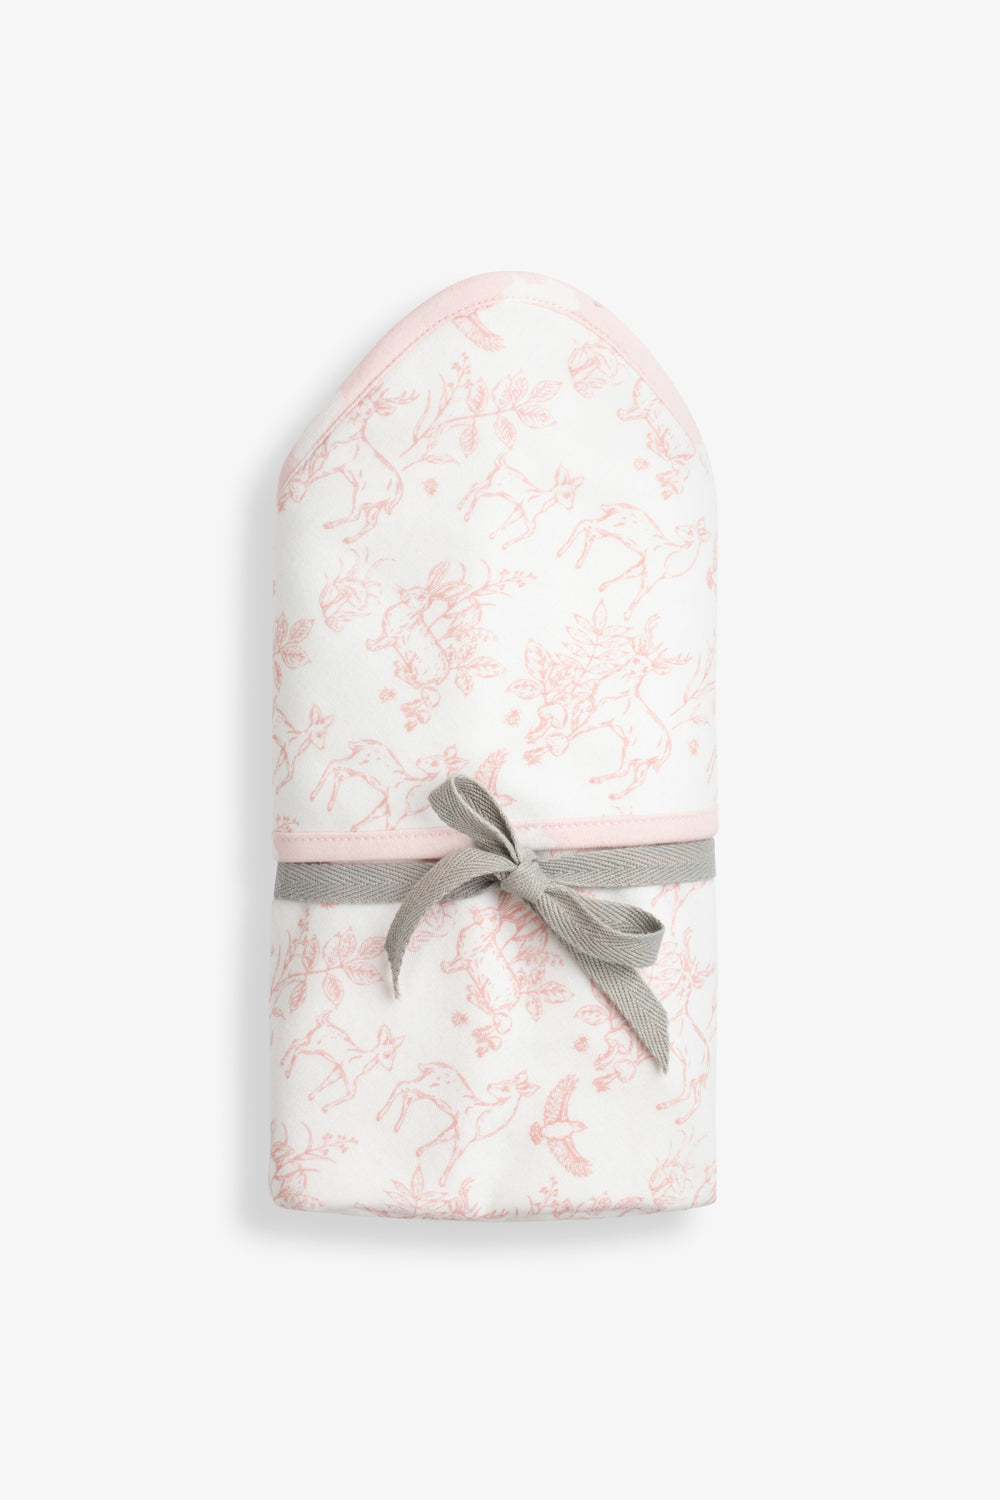 Welcome Little Baby Gift Set, rose pink woodland print